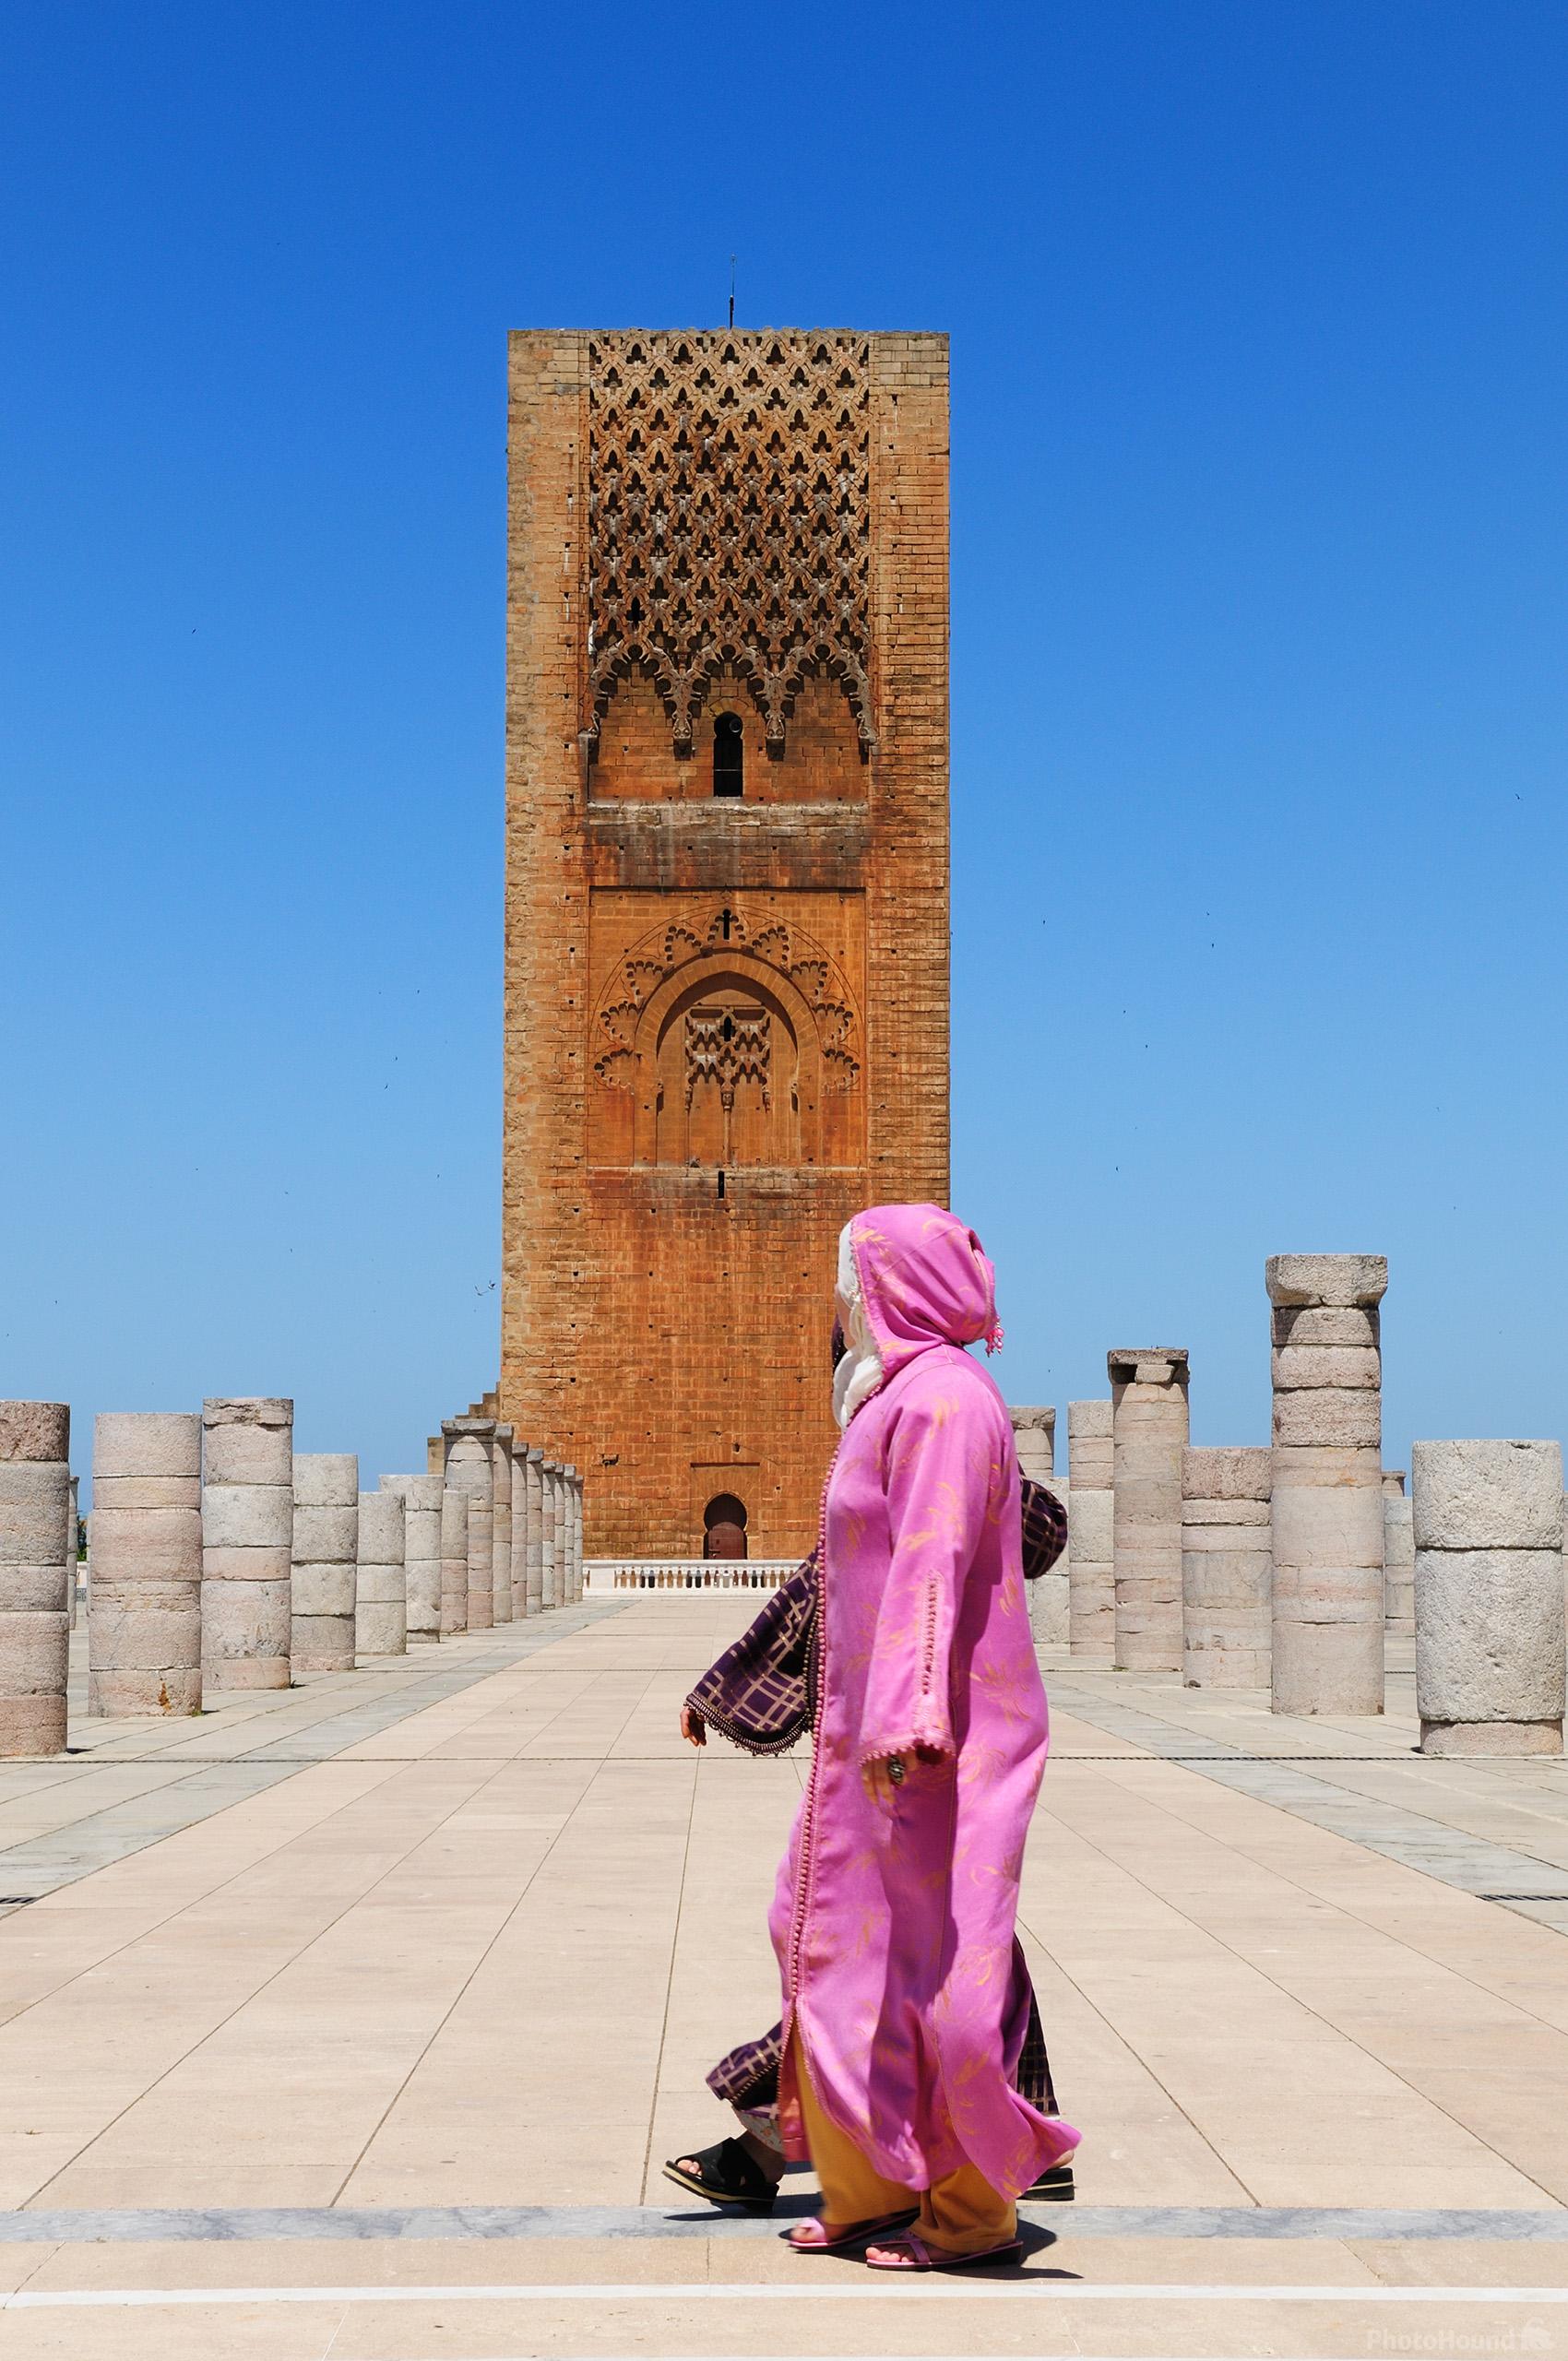 Image of Hassan Tower & Mausoleum of Mohammed V by Luka Esenko